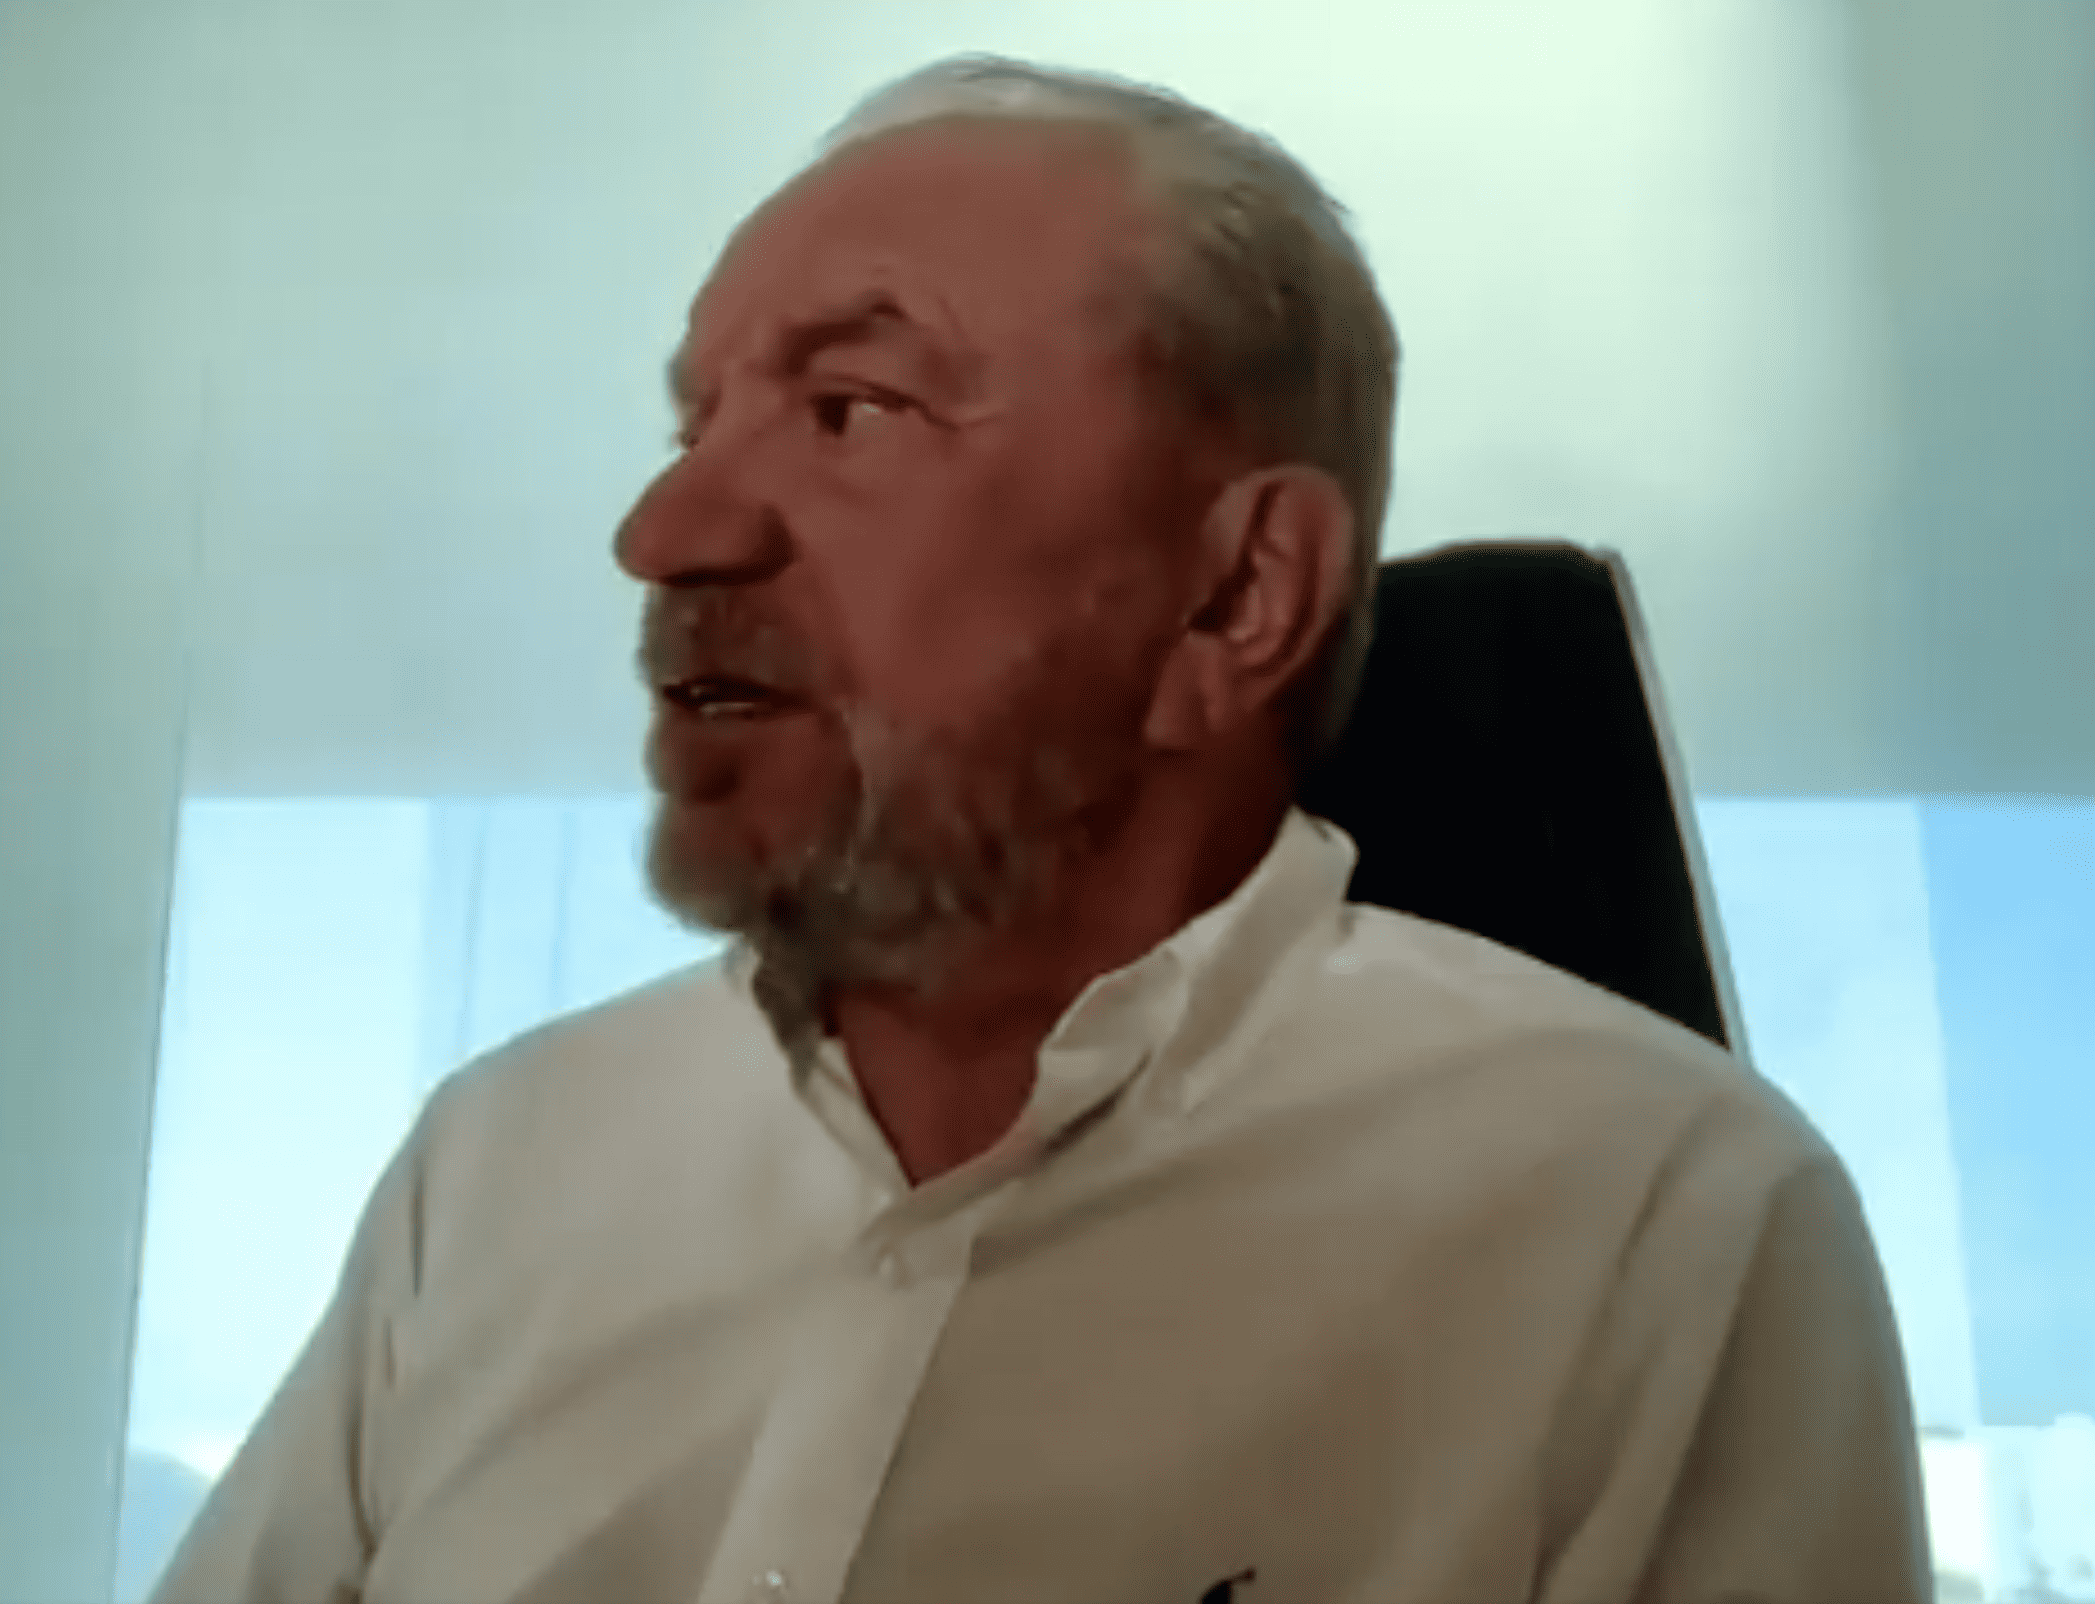 Alan Sugar Zooms into BBC interview to bemoan work-from-home culture